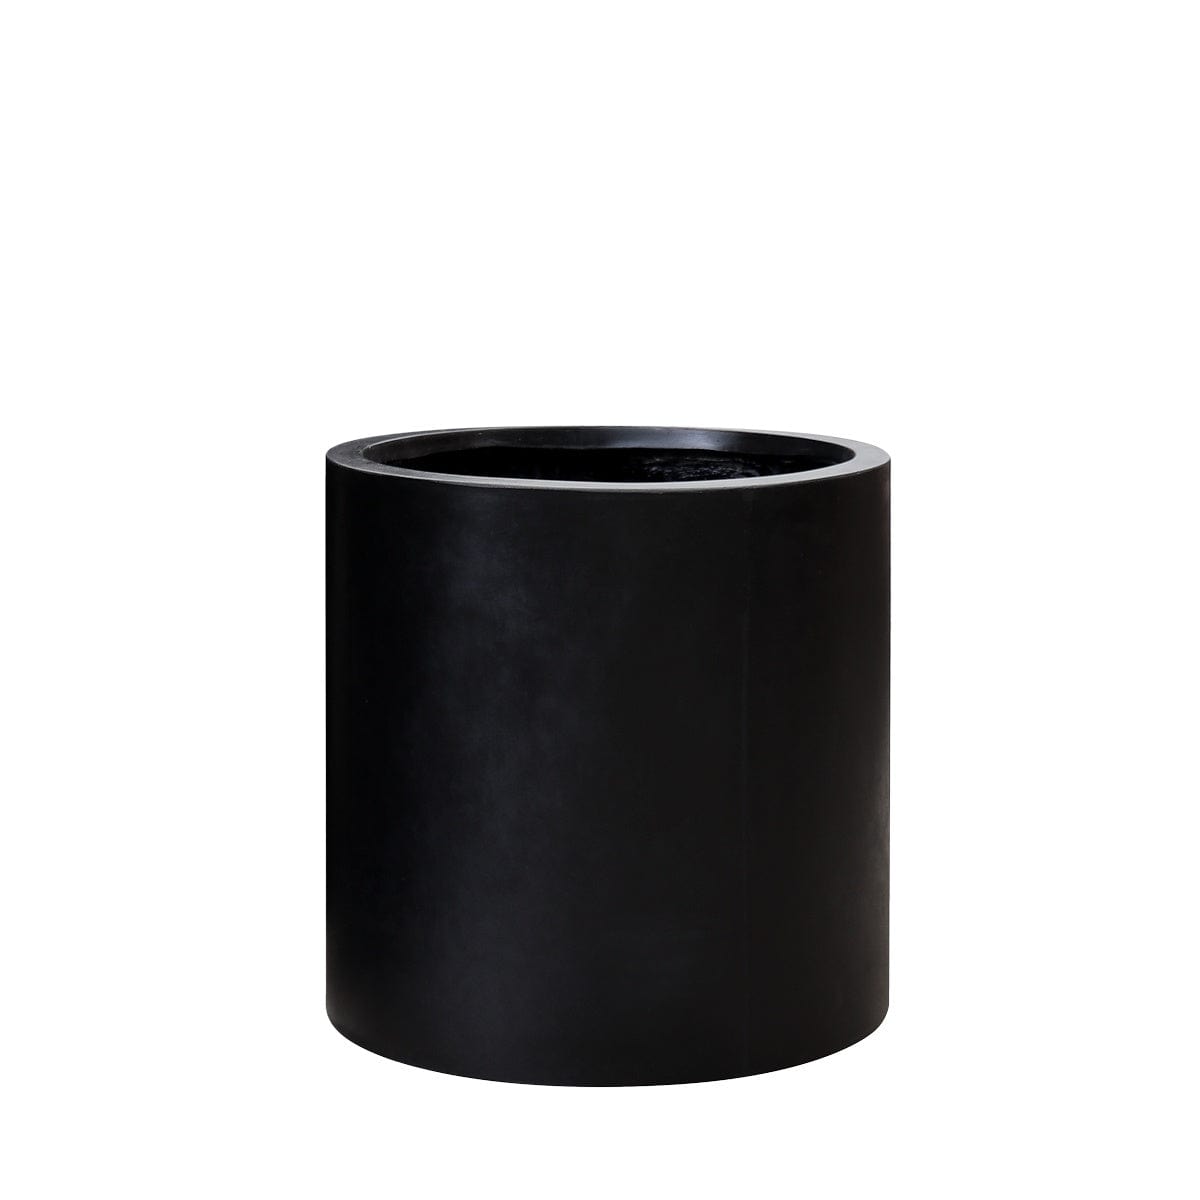 Mikonui Cylinder Planter Small - Black PRE ORDER Little & Fox